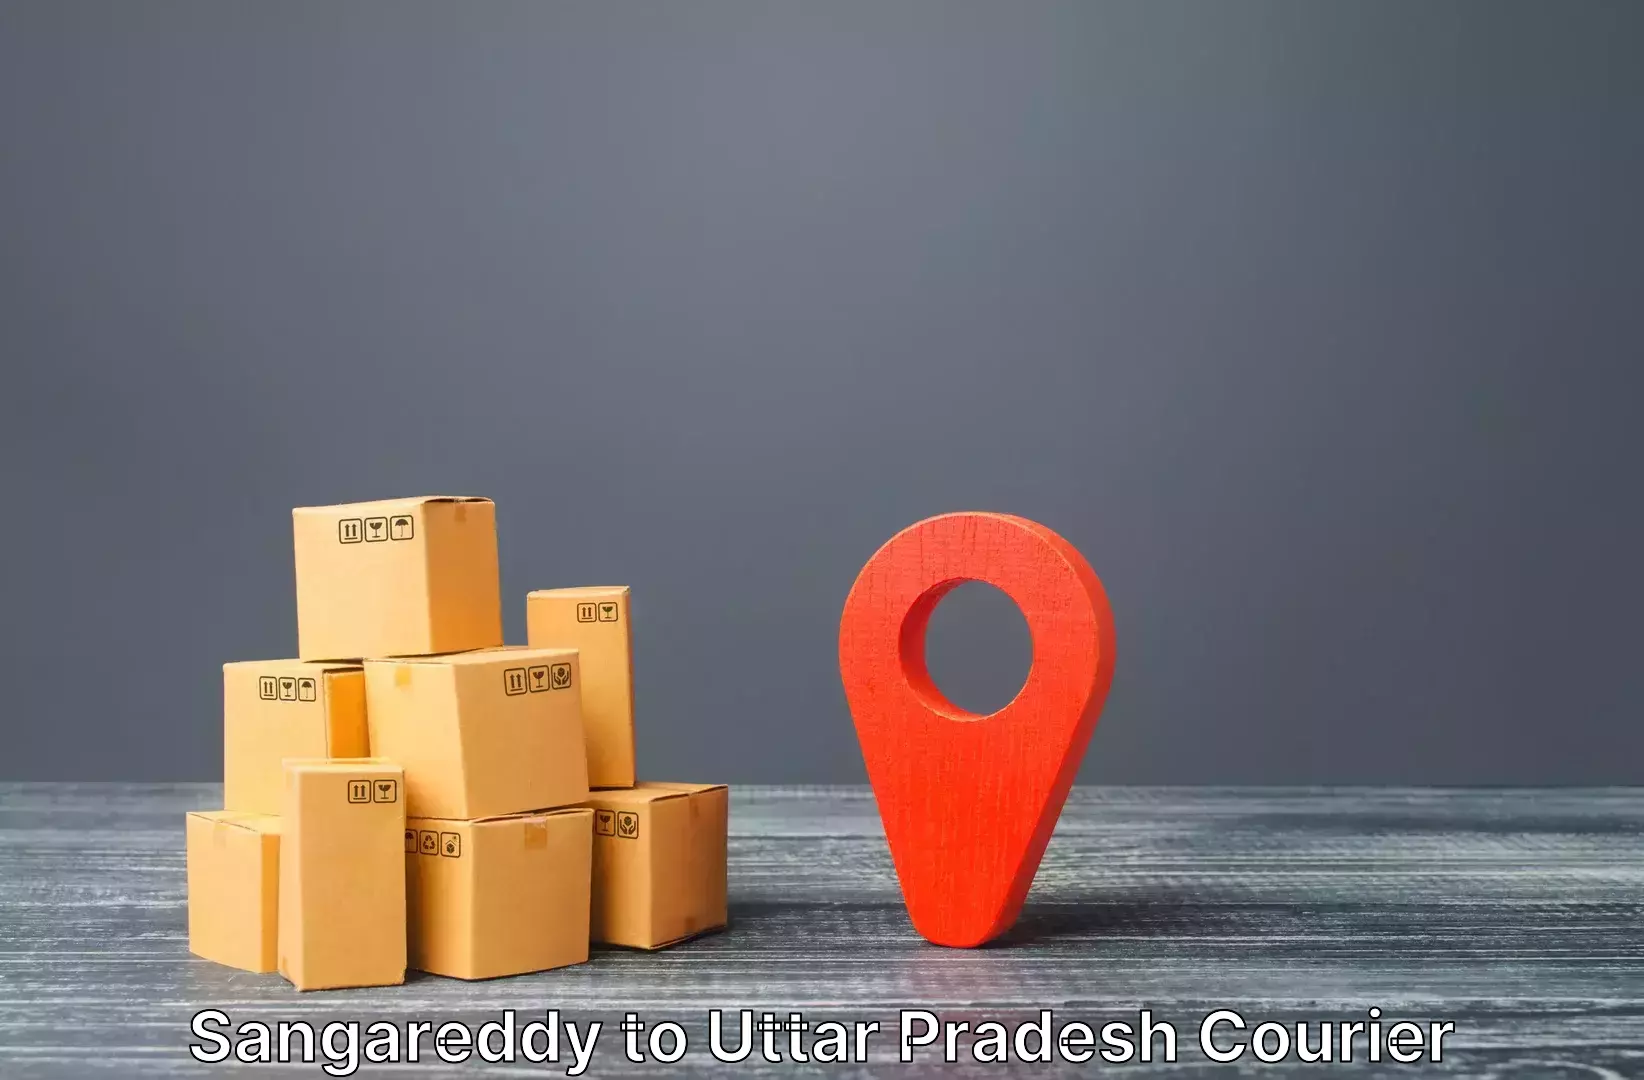 Baggage delivery technology Sangareddy to Khalilabad